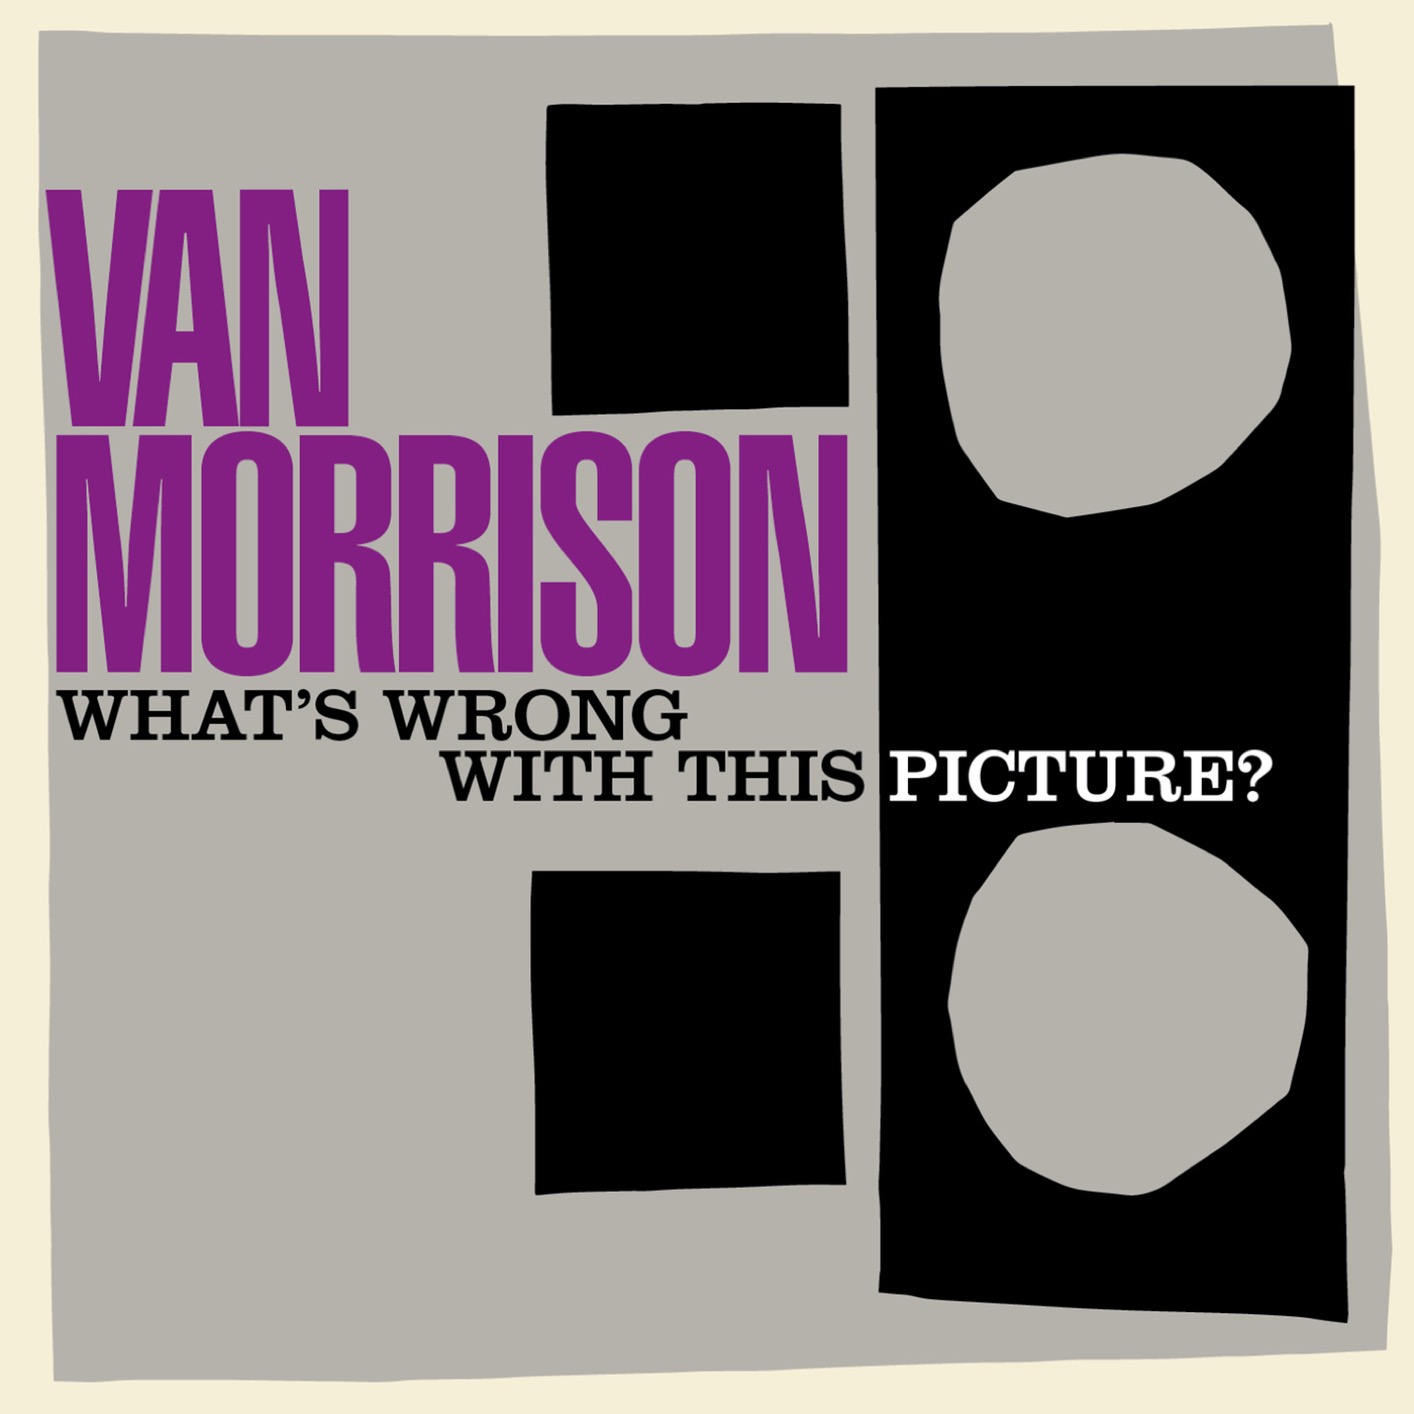 Van Morrison - What’s Wrong with This Picture? (Remastered) (2003/2020) [FLAC 24bit/44,1kHz]